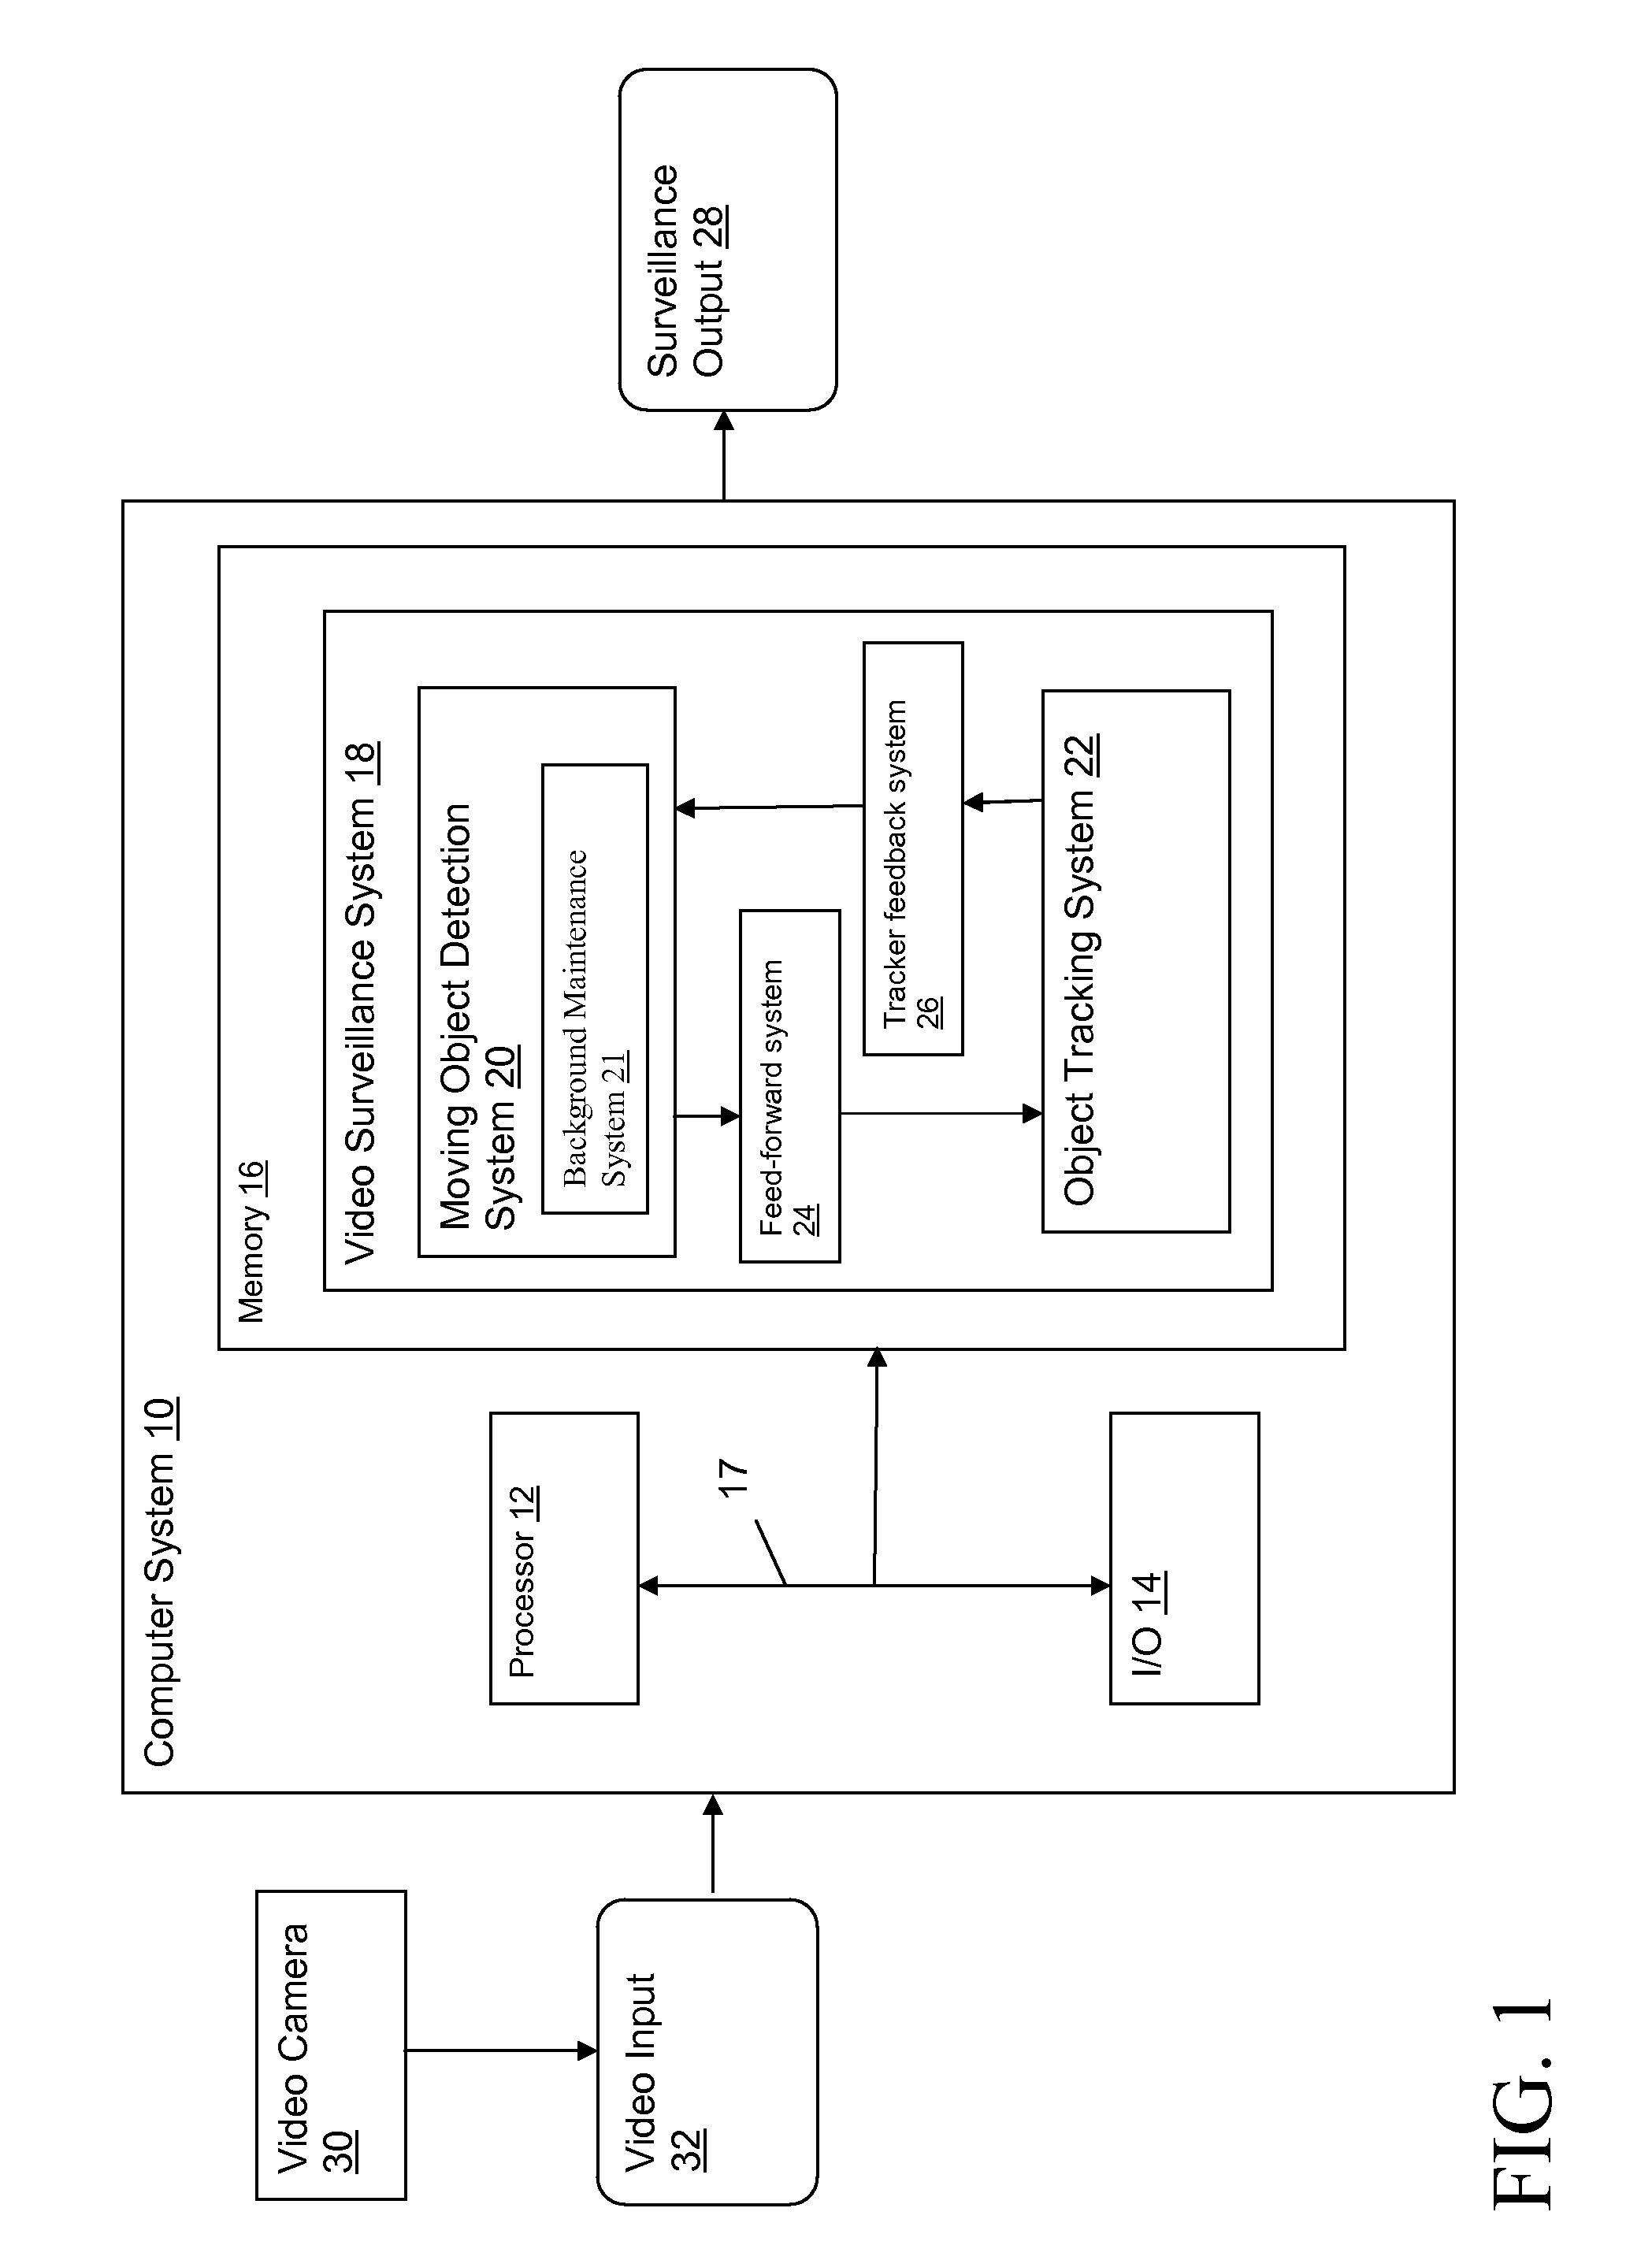 System and method for managing the interaction of object detection and tracking systems in video surveillance